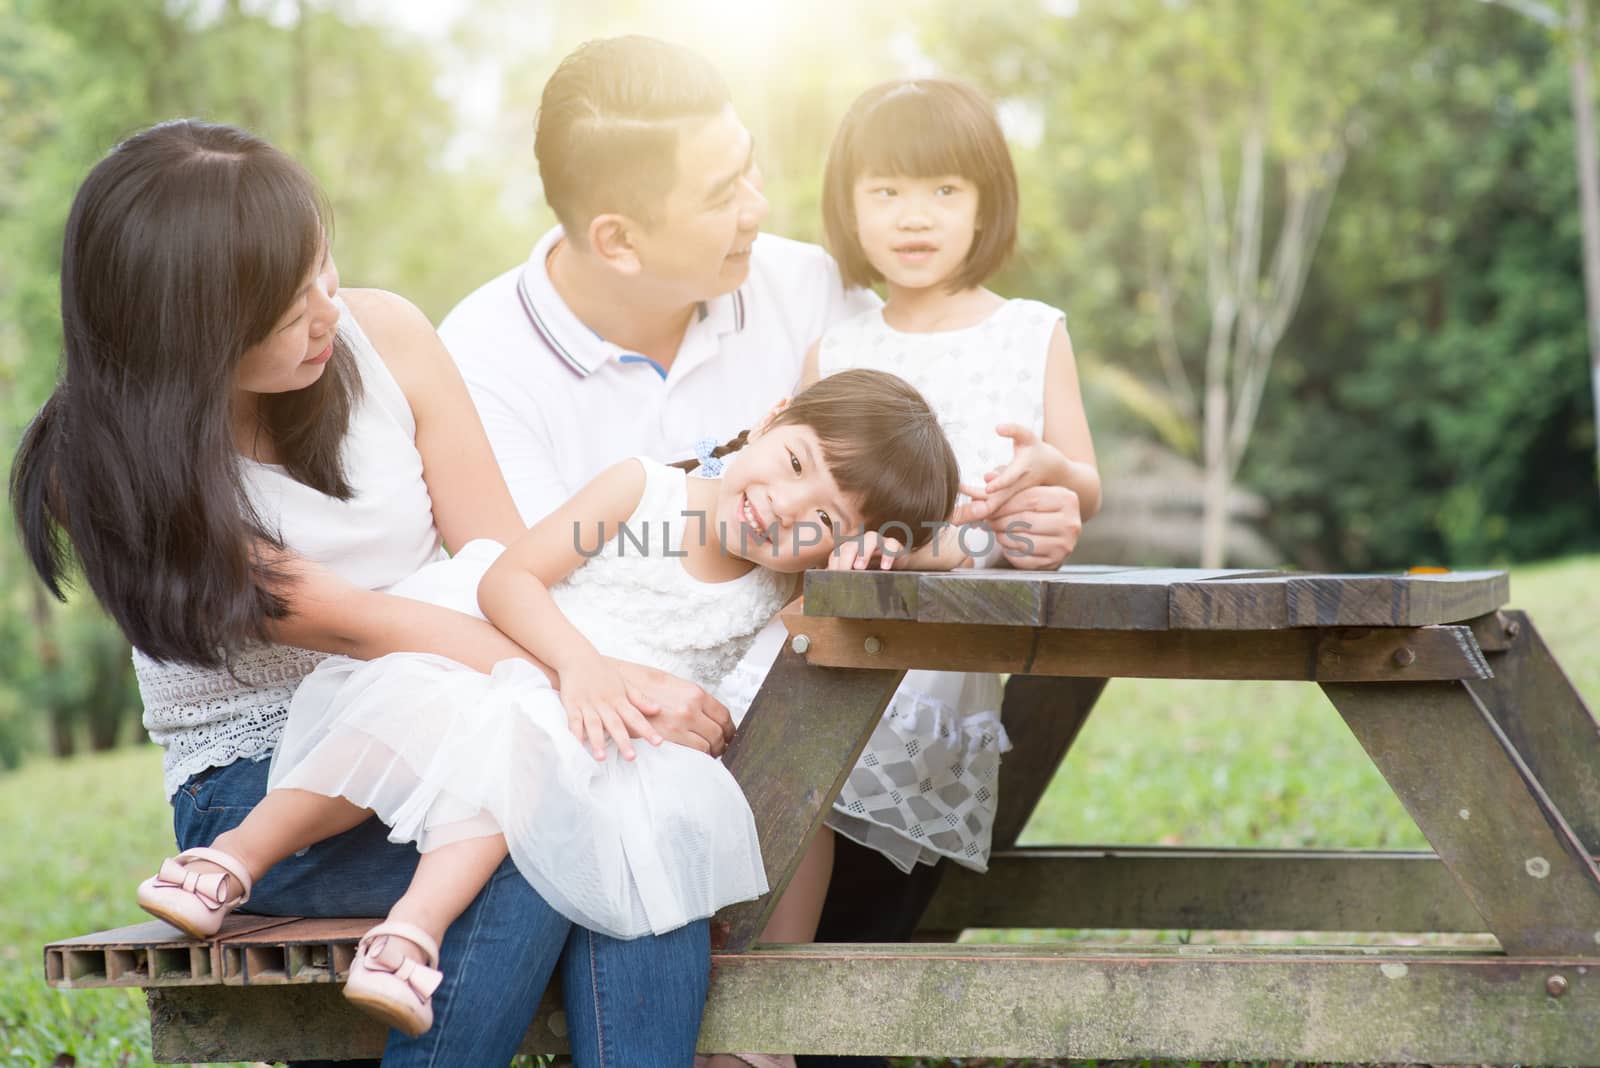 Asian family portrait. Parents and children having fun at outdoor park. Blank space on wooden table.